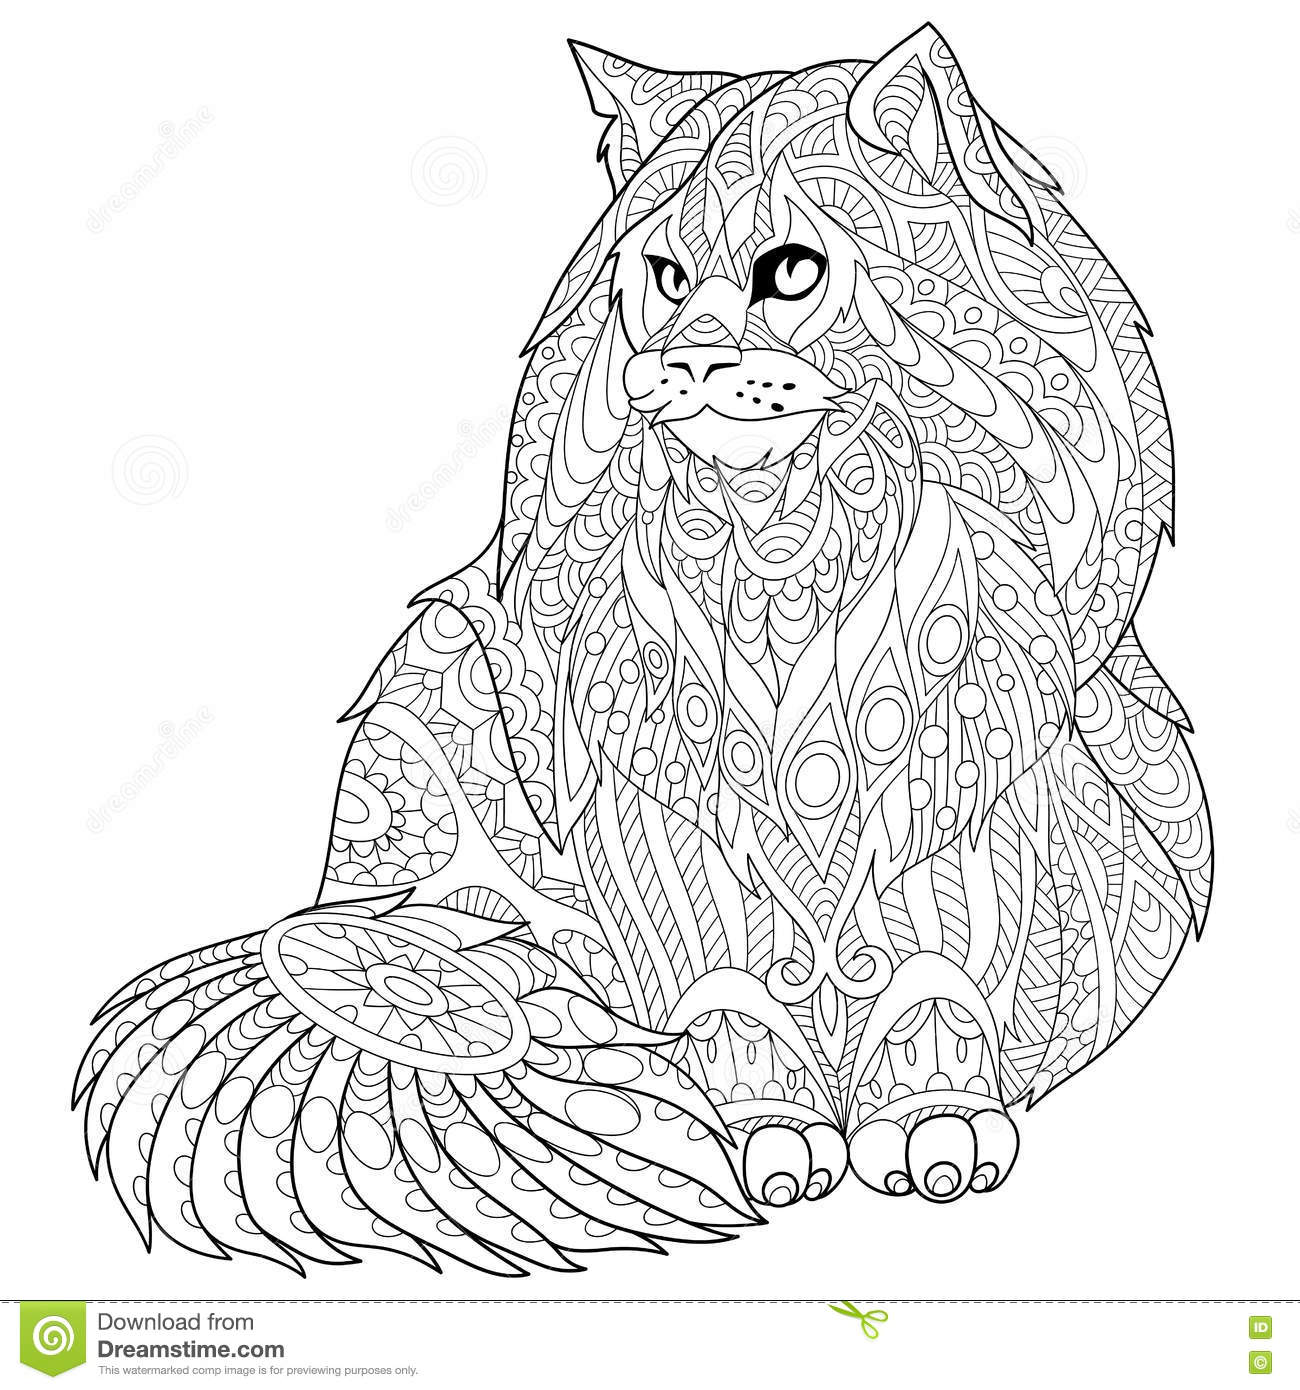 Maine Coon coloring #16, Download drawings